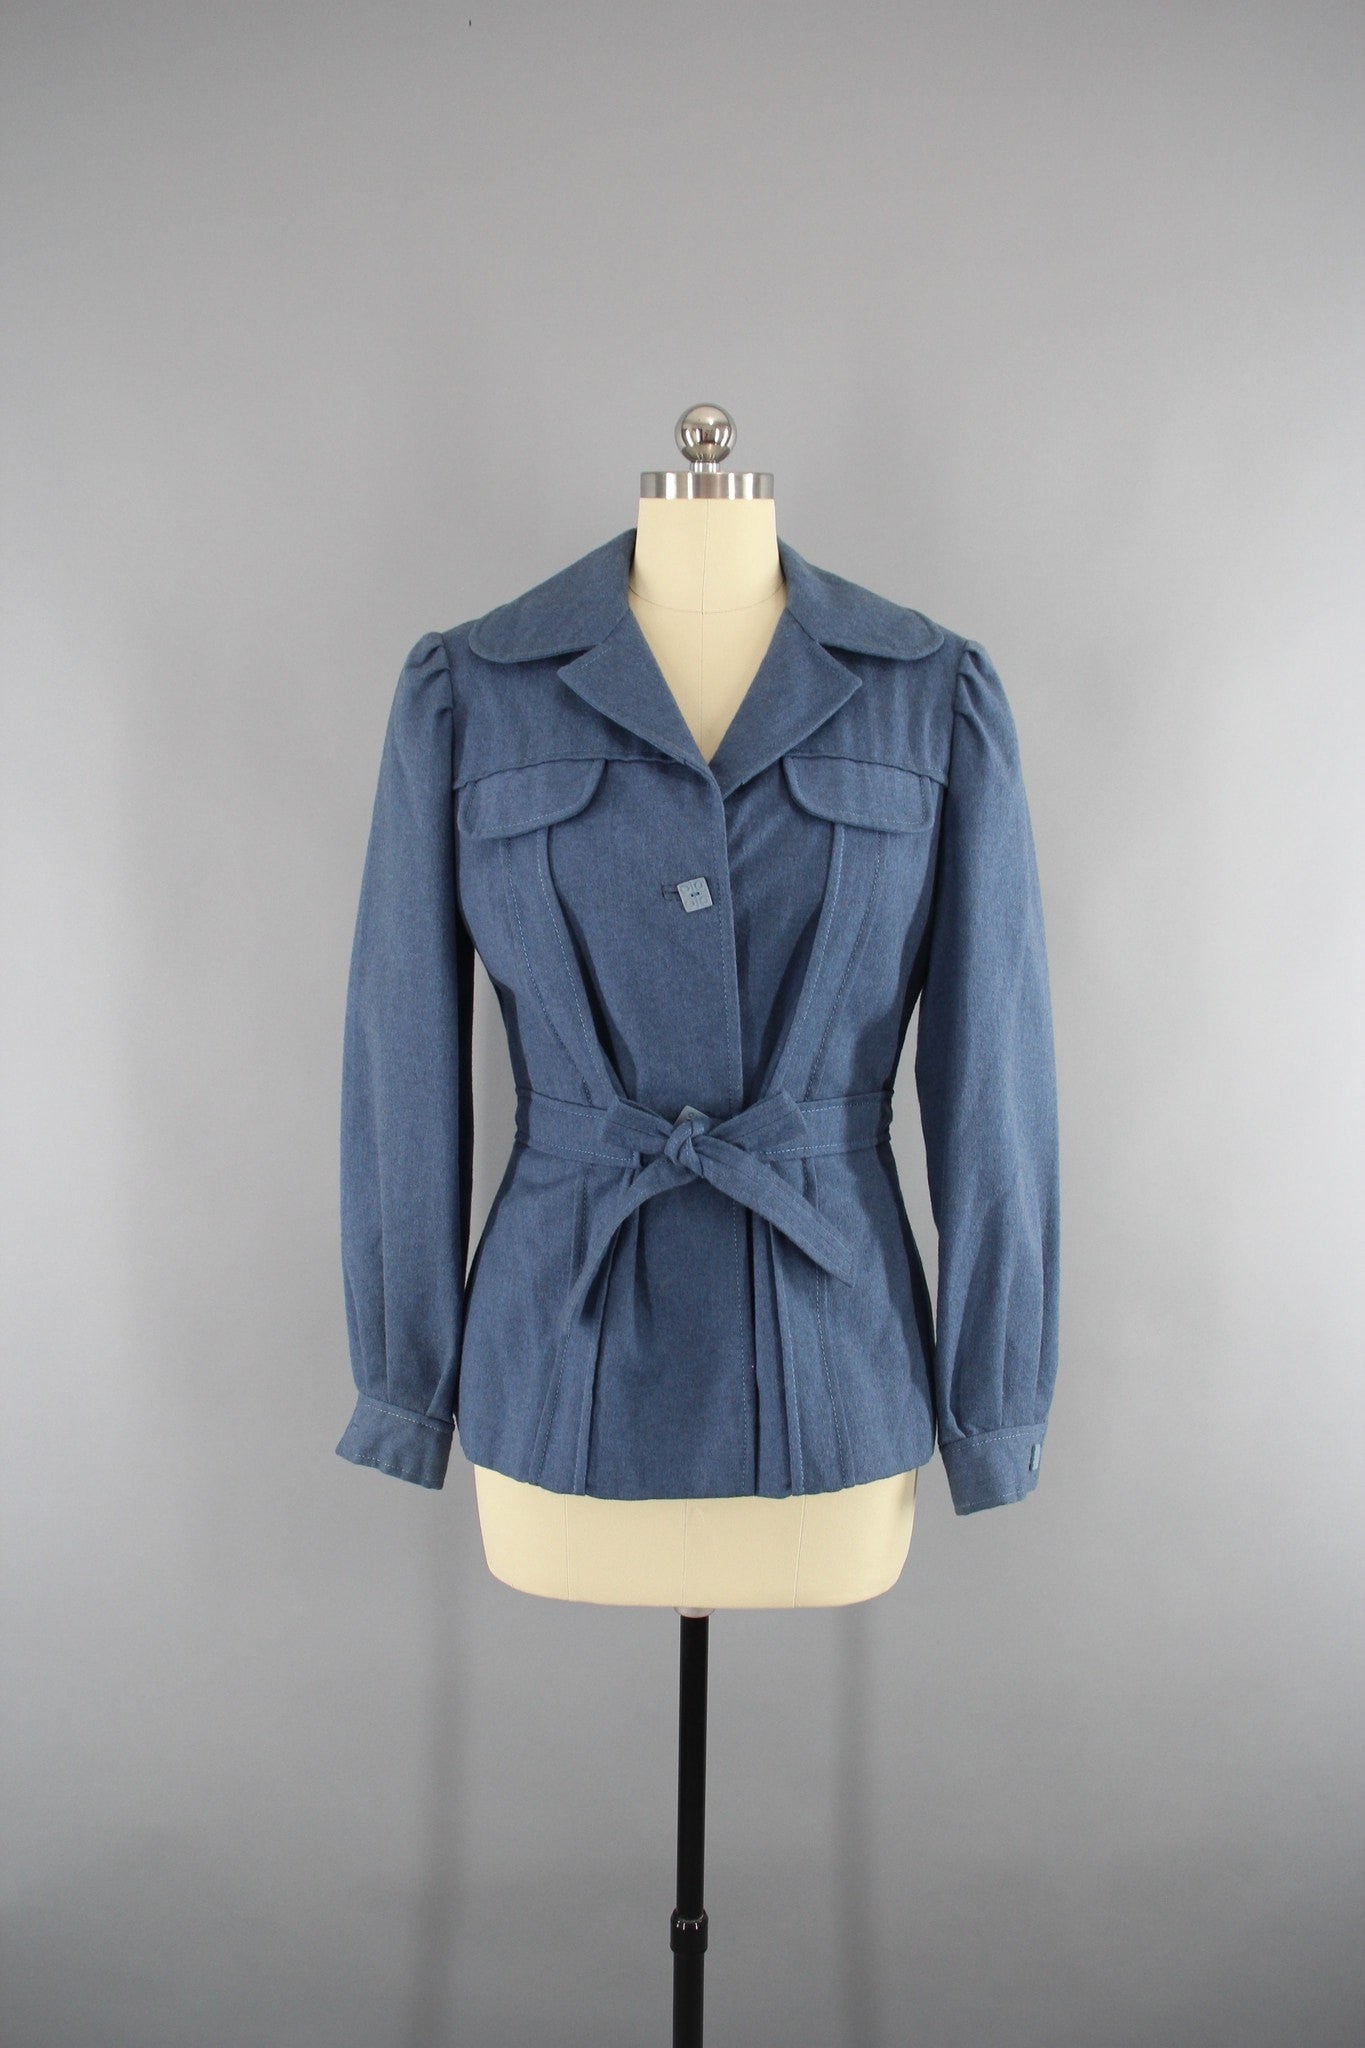 Vintage 1940s Wool WWII Women's Military Style Jacket Coat - ThisBlueBird